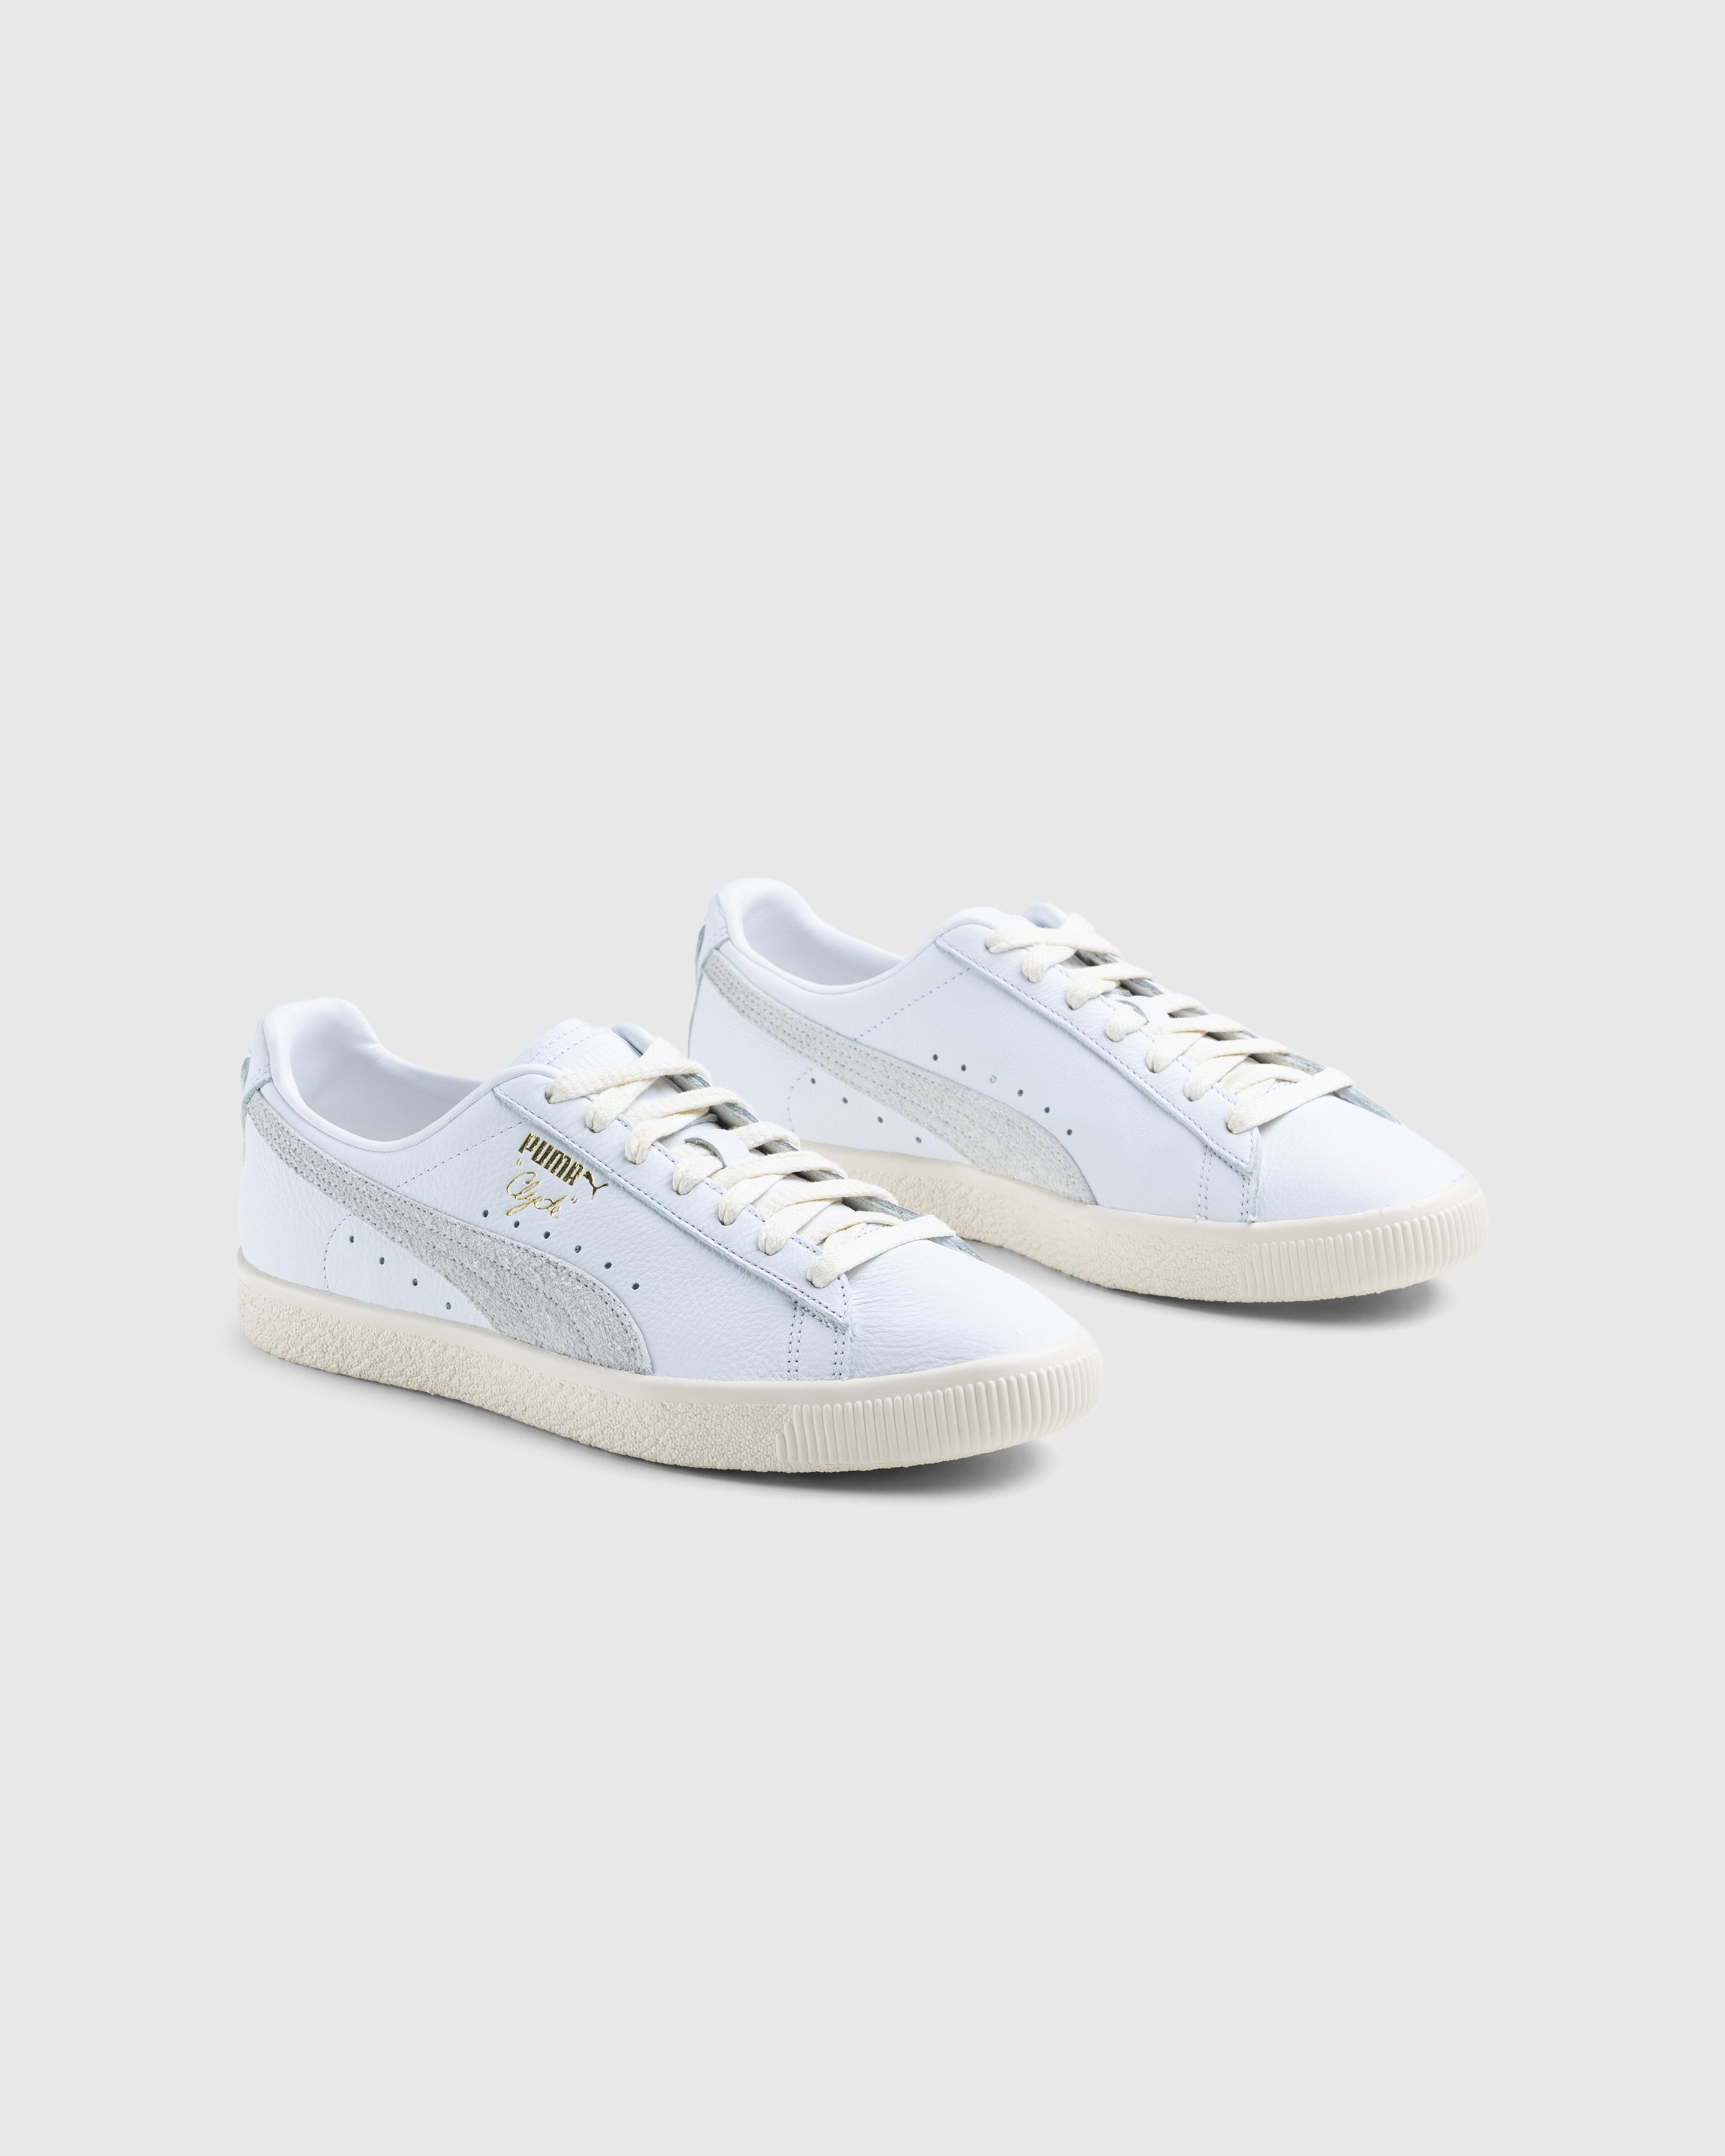 Puma - Clyde Base White - Footwear - White - Image 3